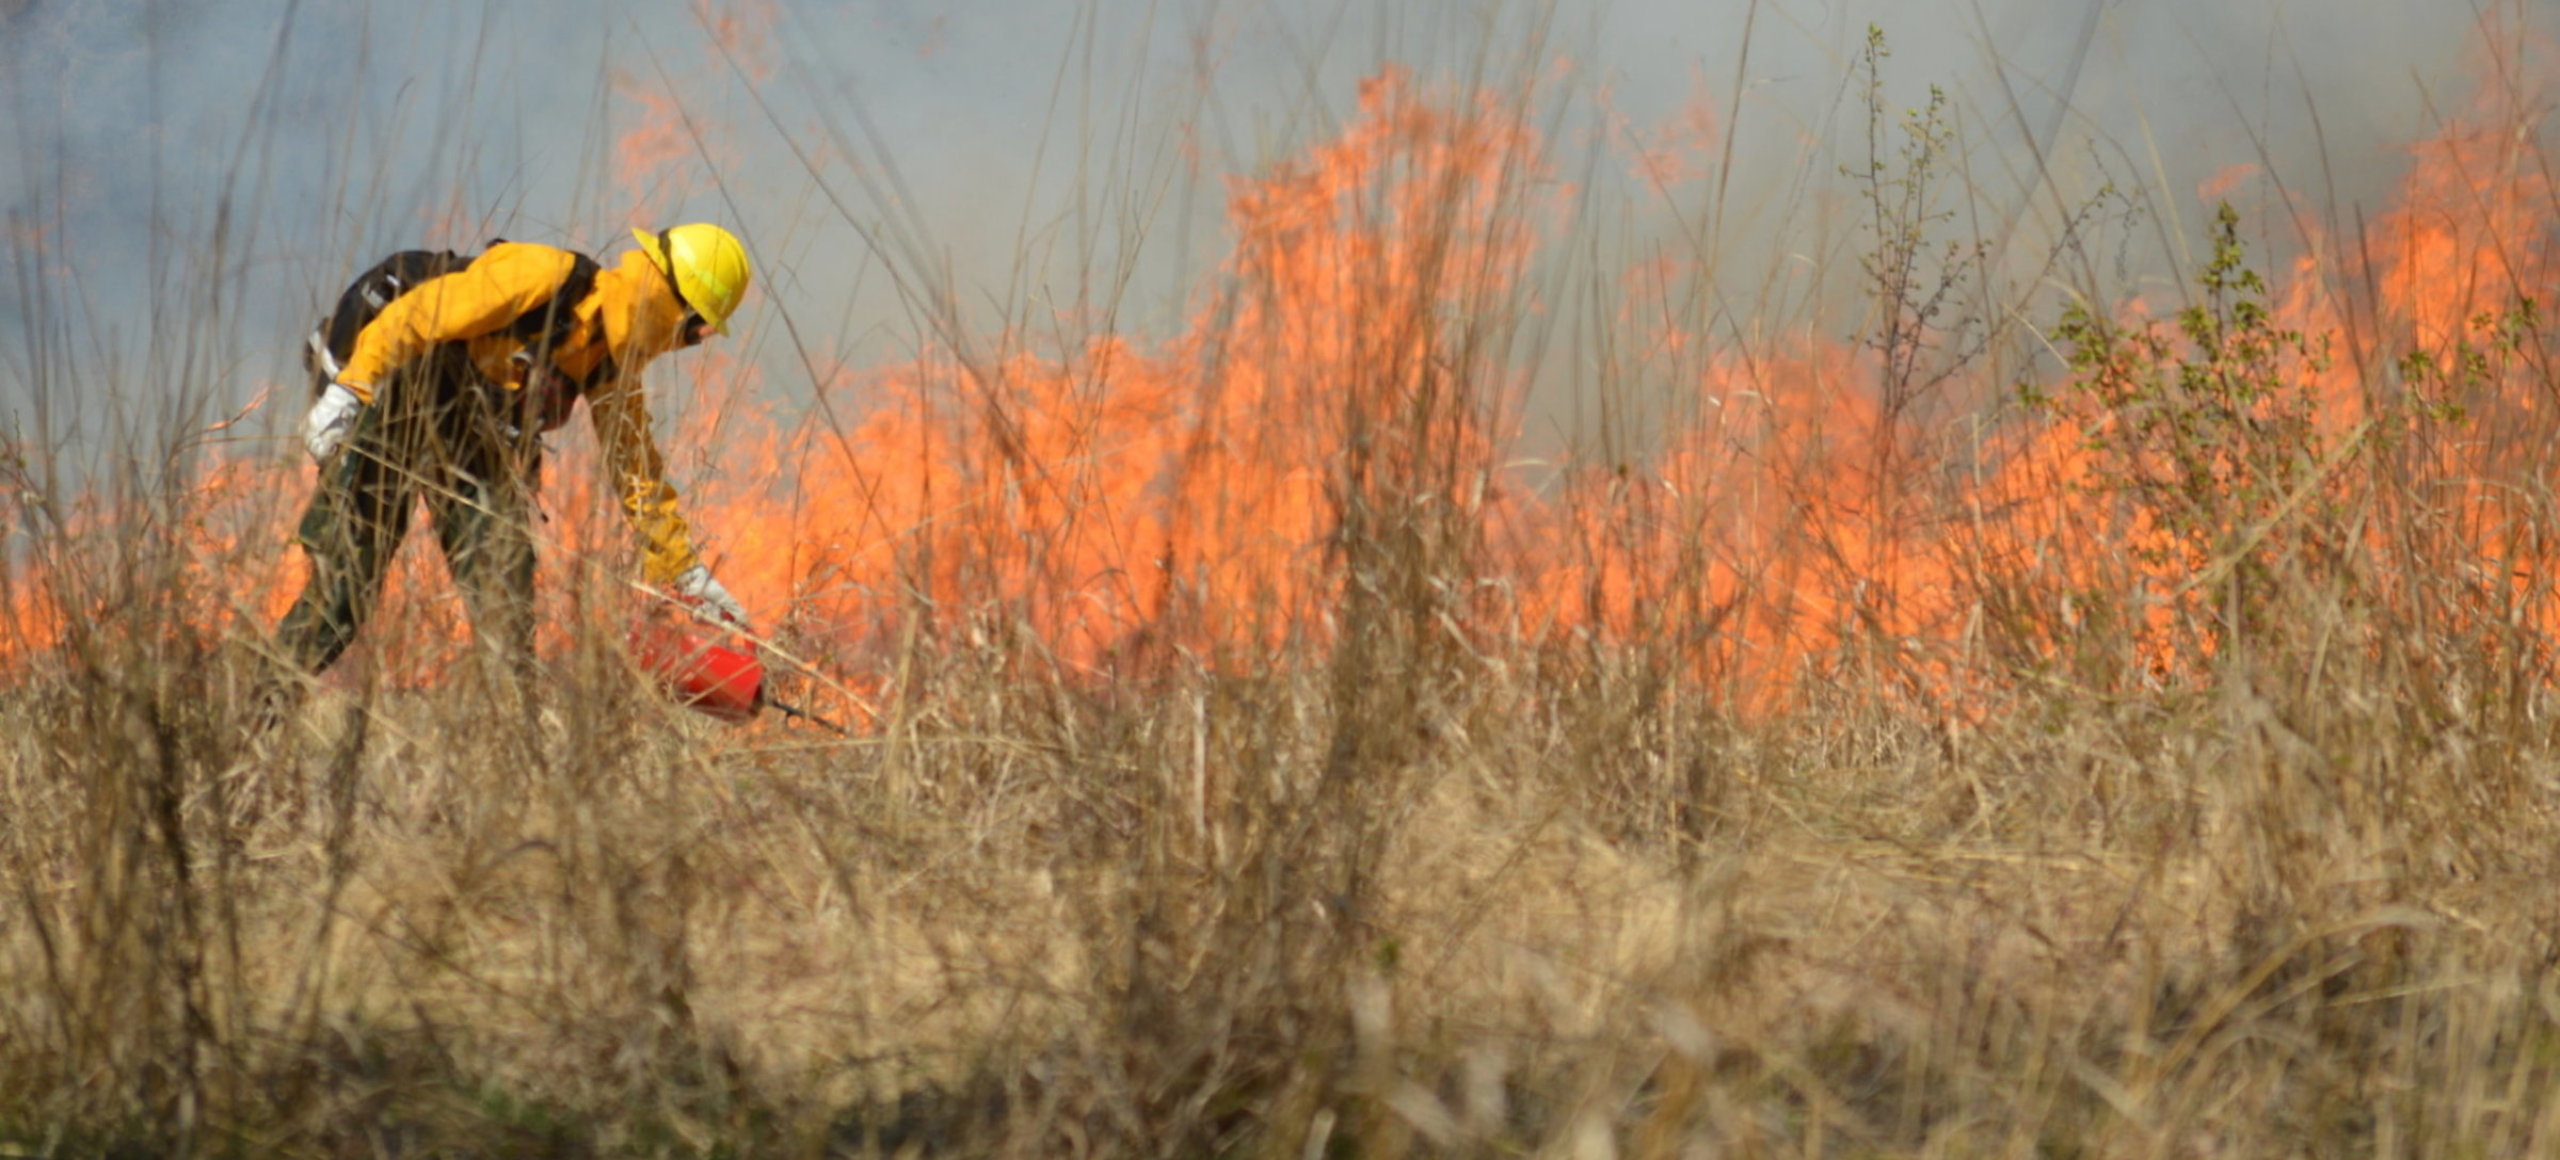 A person wearing yellow protective clothing pours fluid onto the brush in a field, with an orange fire burning behind them.